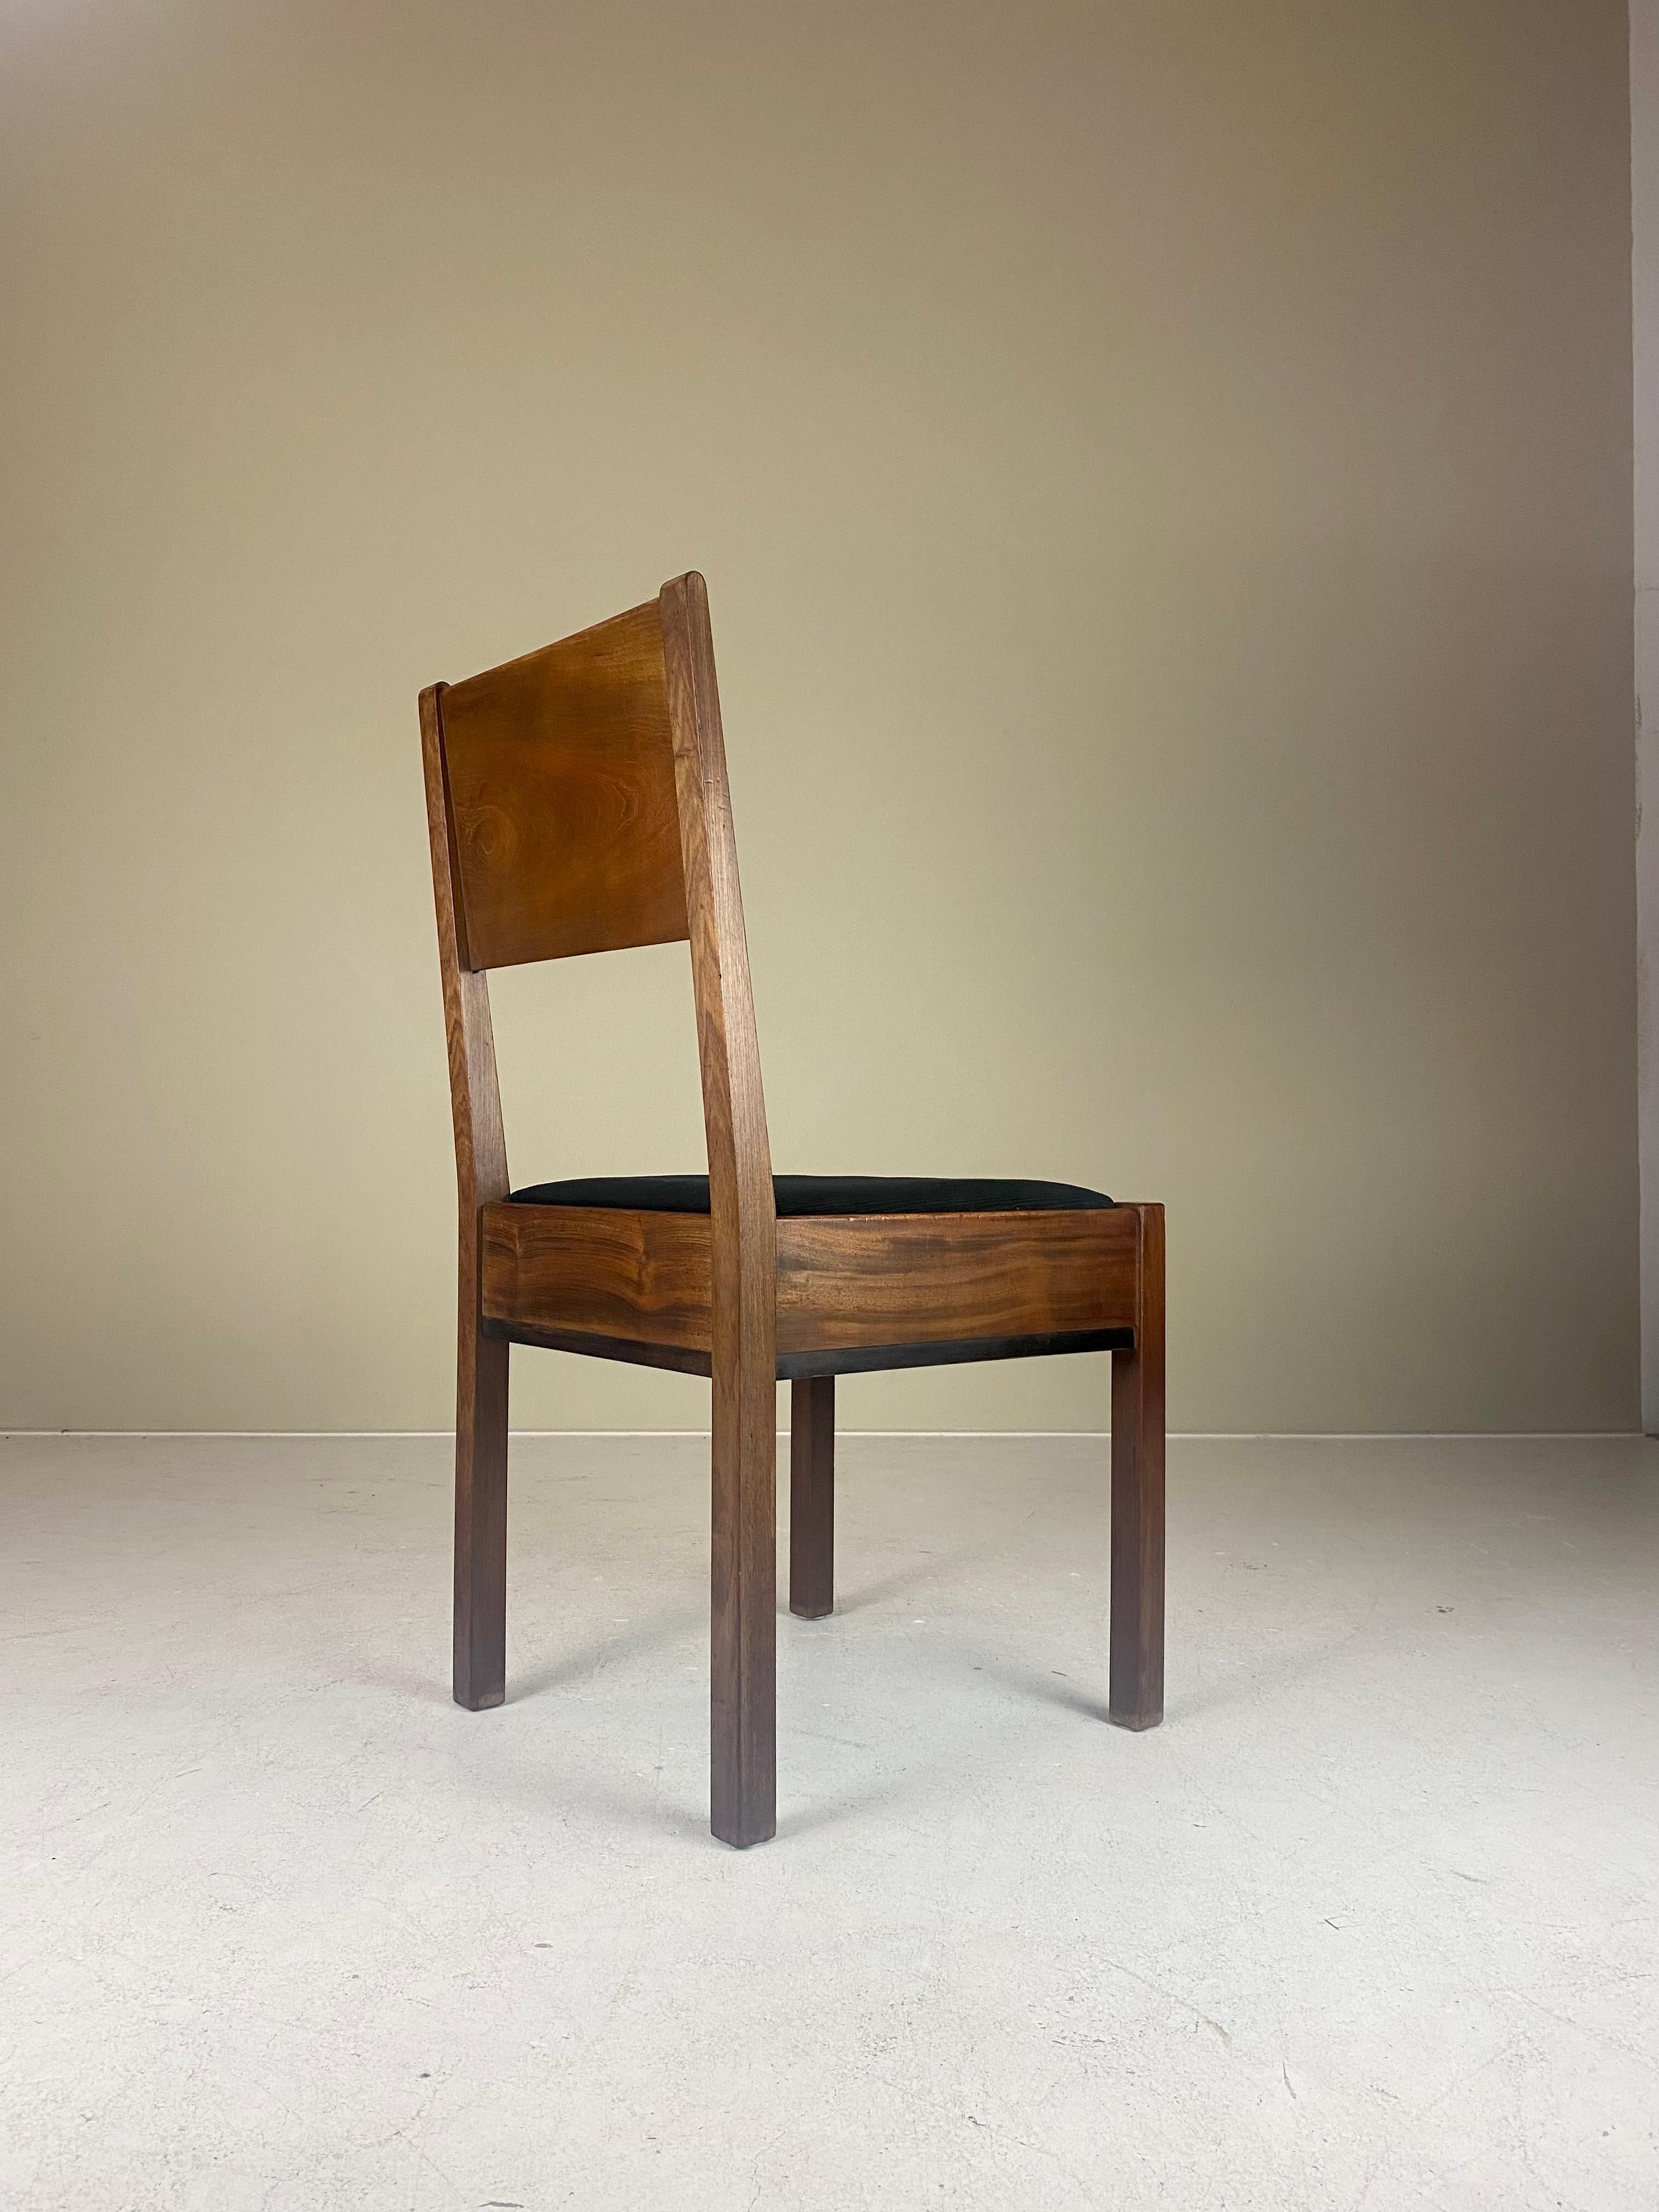 Listed is a rare set of Modernist dining chairs, attributed to J.A. Muntendam — who was the artistic director of L.O.V. Oosterbeek in the late 1920s. 

L.O.V. is the abbreviation of Labor Onia Vincit which means 'Work conquers all’. In the days